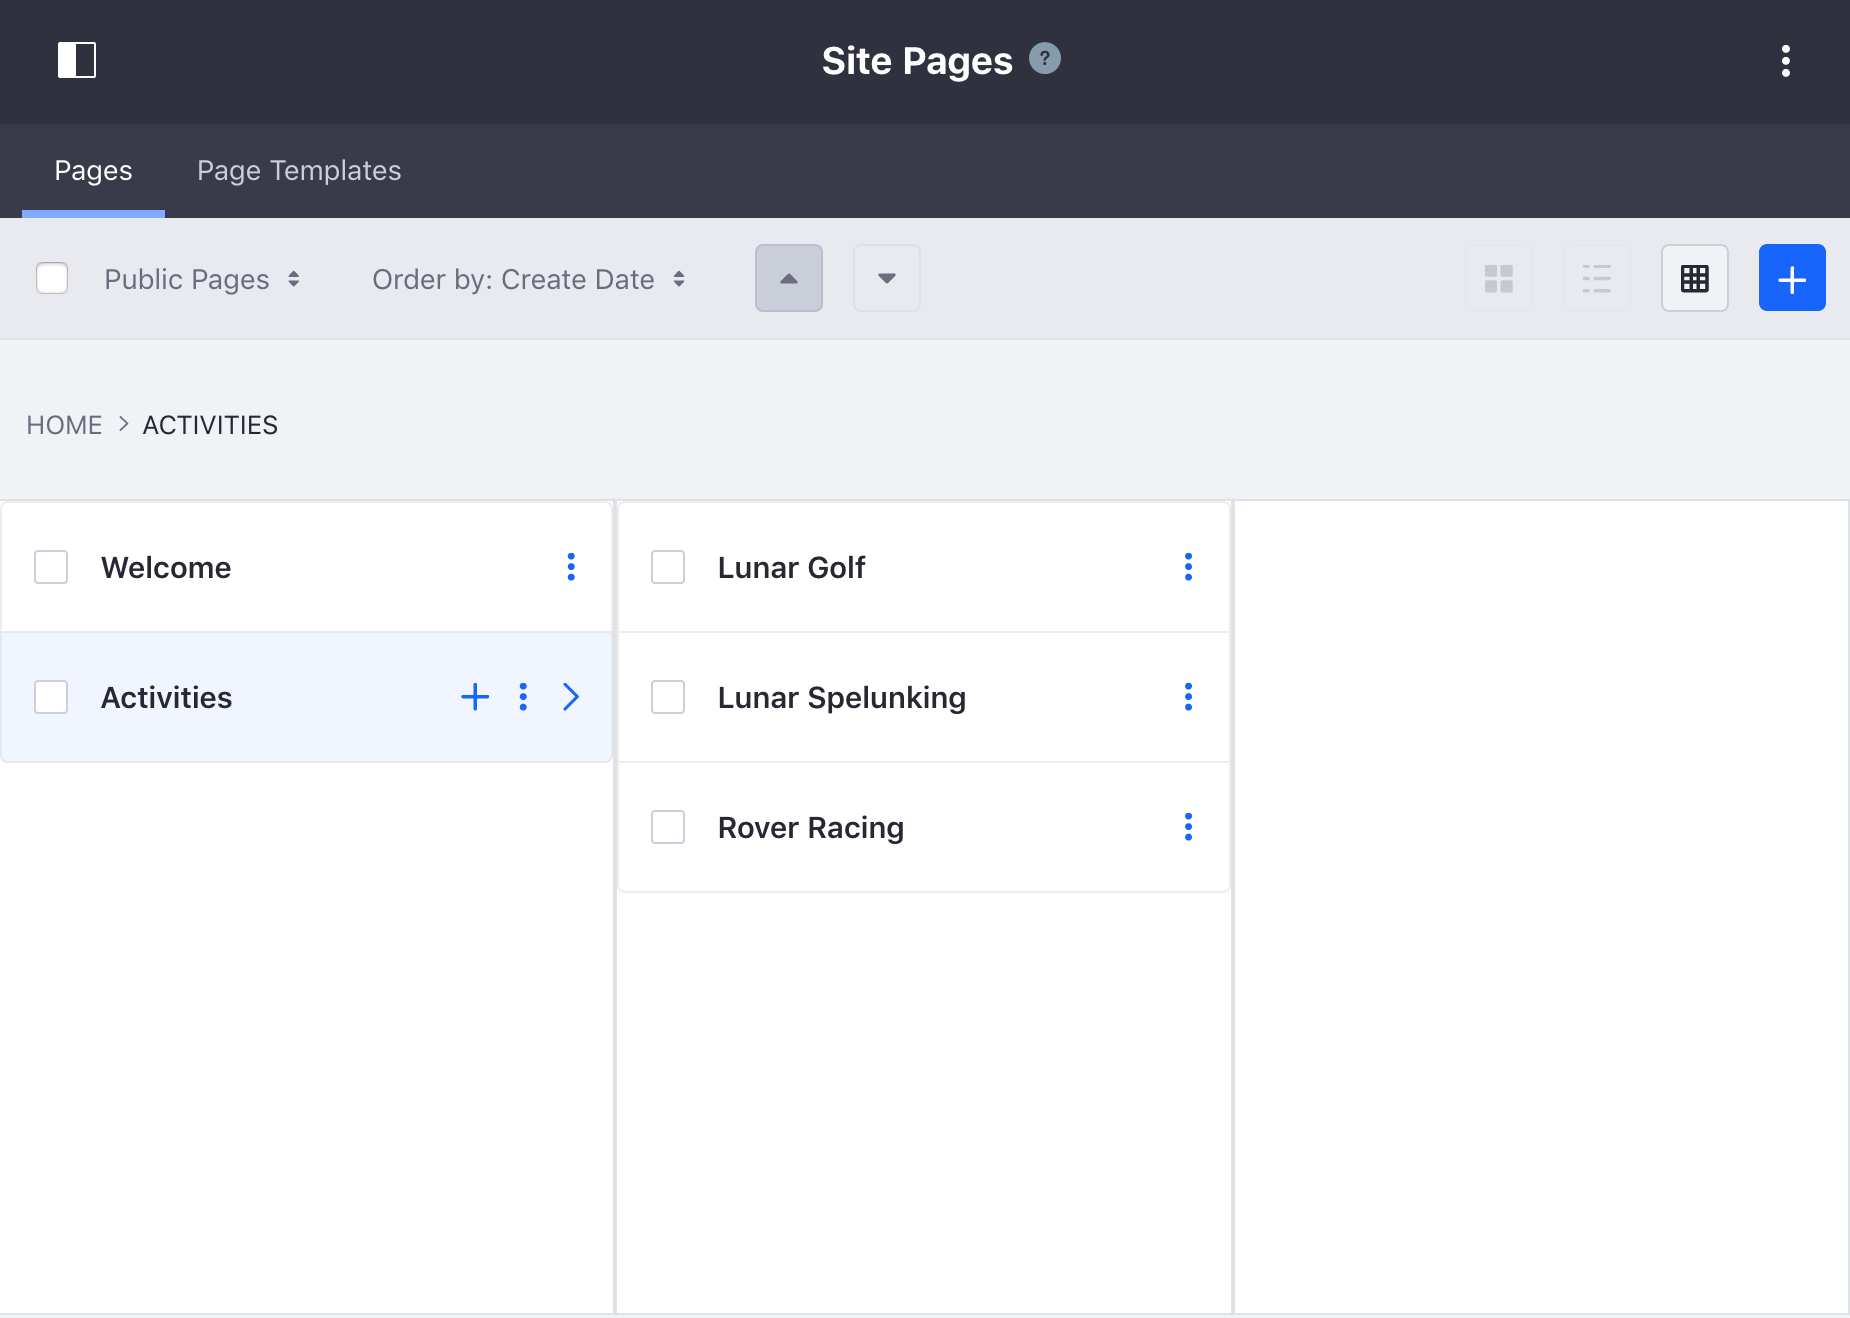 Figure 1: The Sites Pages page allows you to edit your Site pages as a whole.